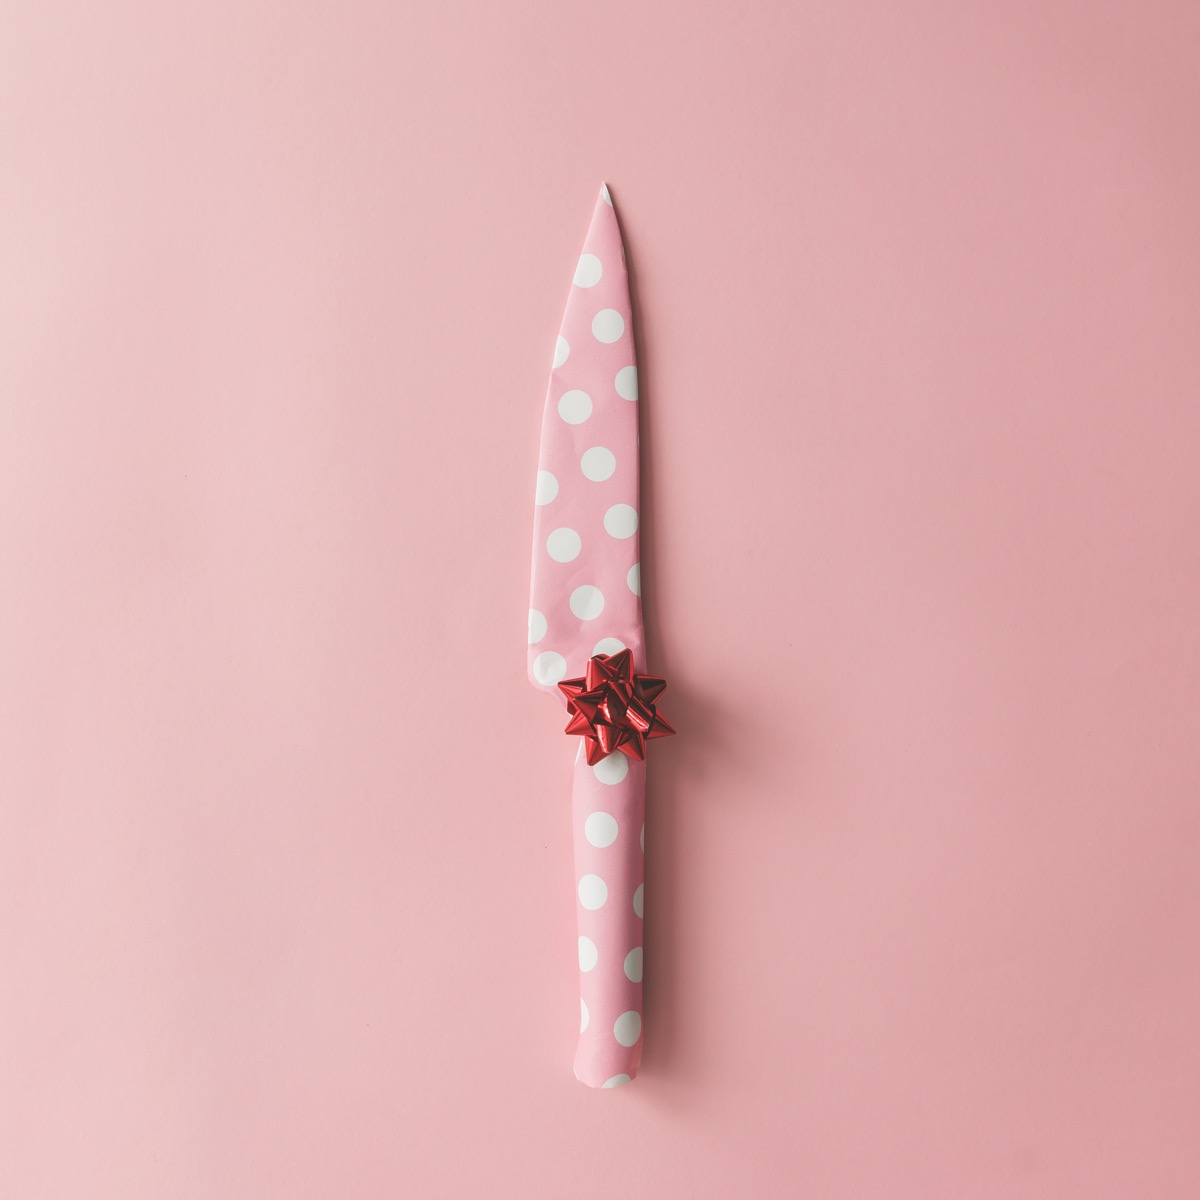 gift wrapped knife on pink background